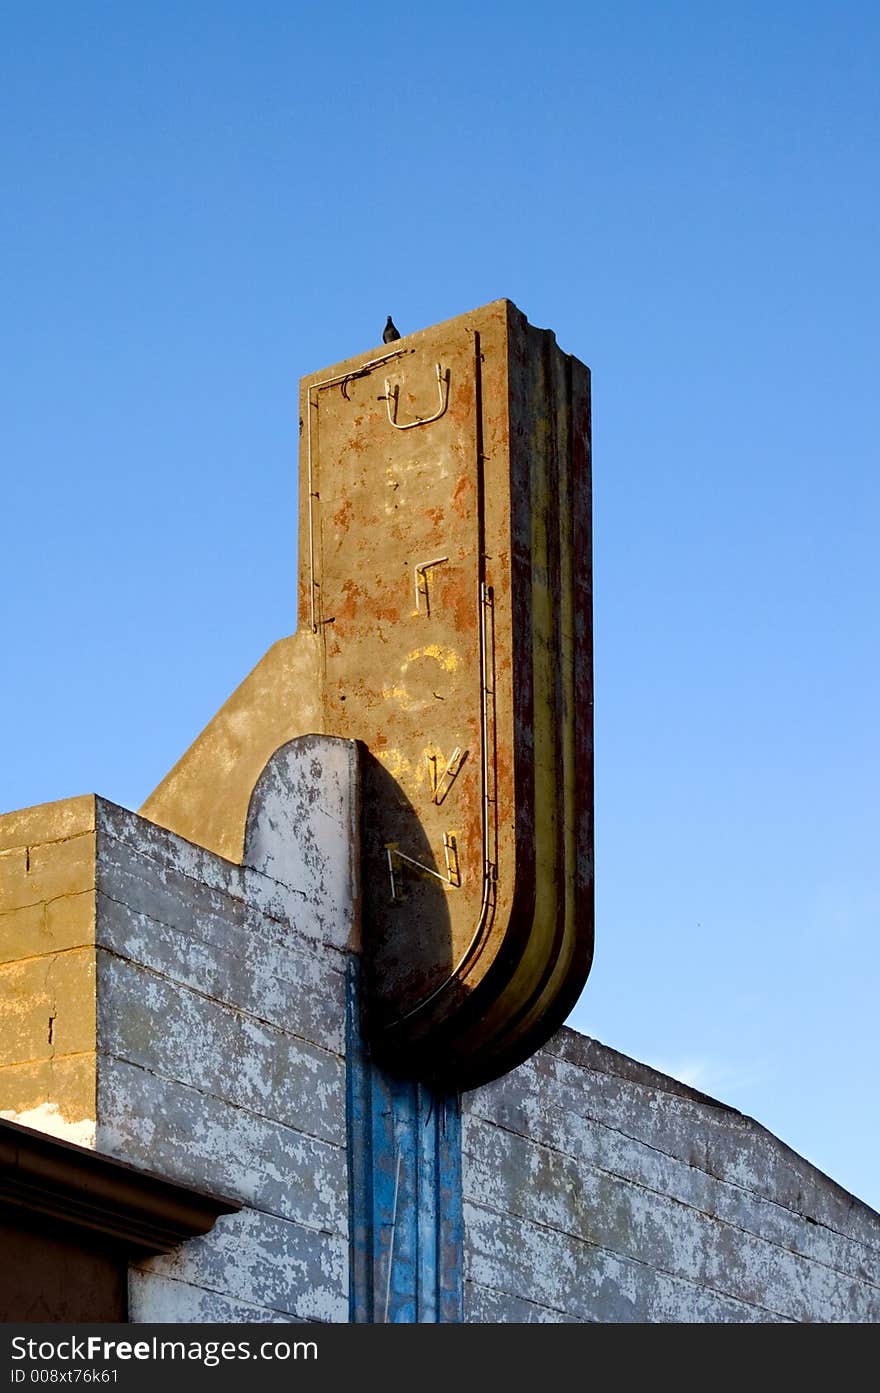 An old vintage theatre in small desert town, in ruins